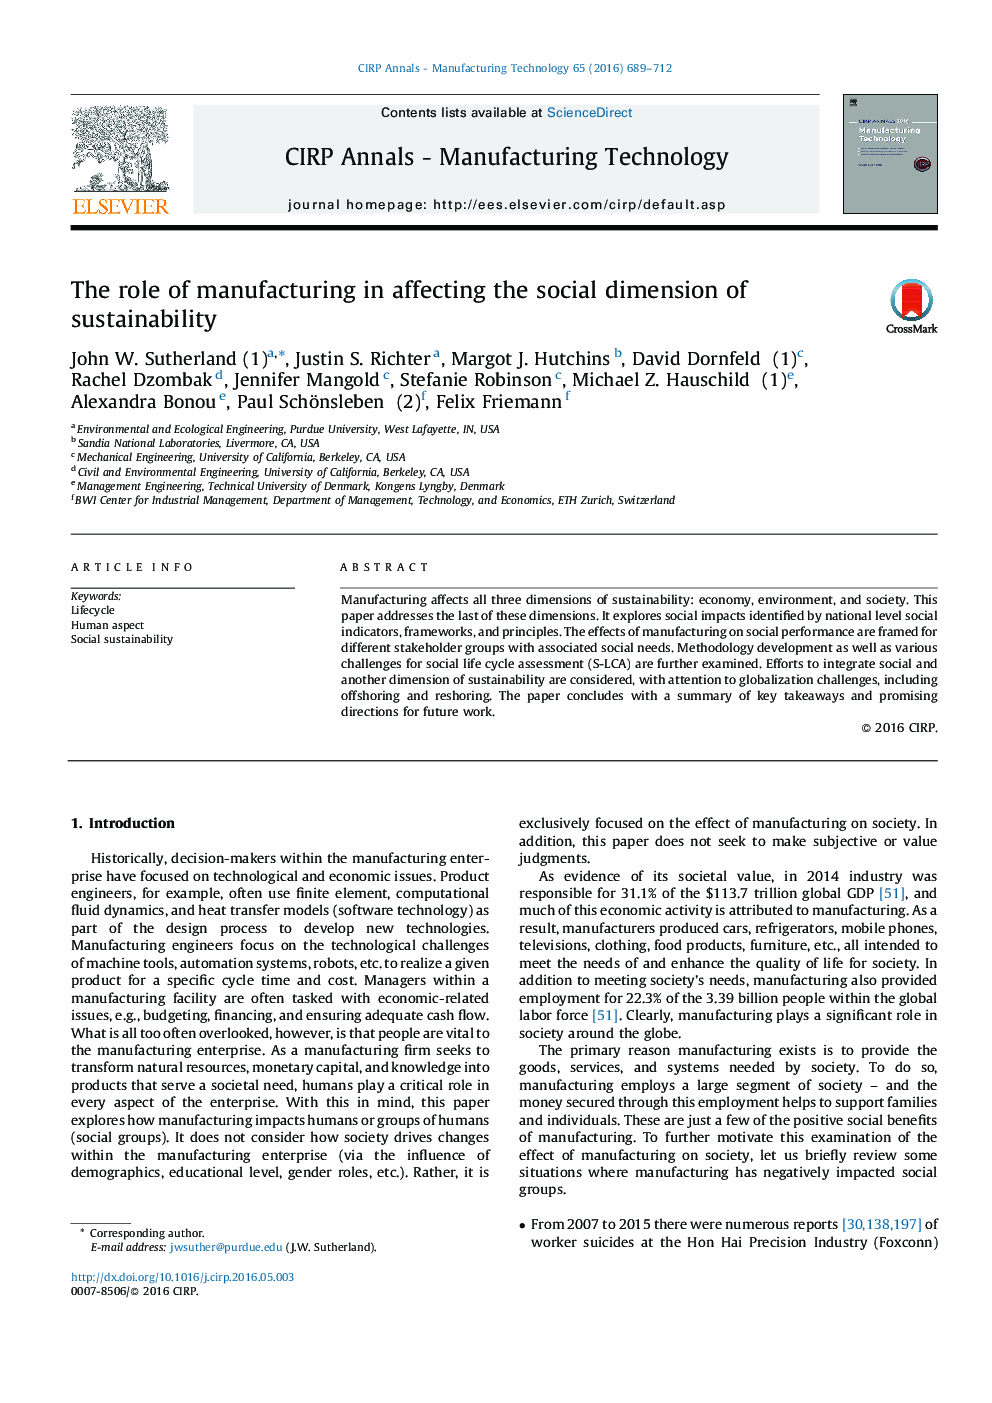 The role of manufacturing in affecting the social dimension of sustainability